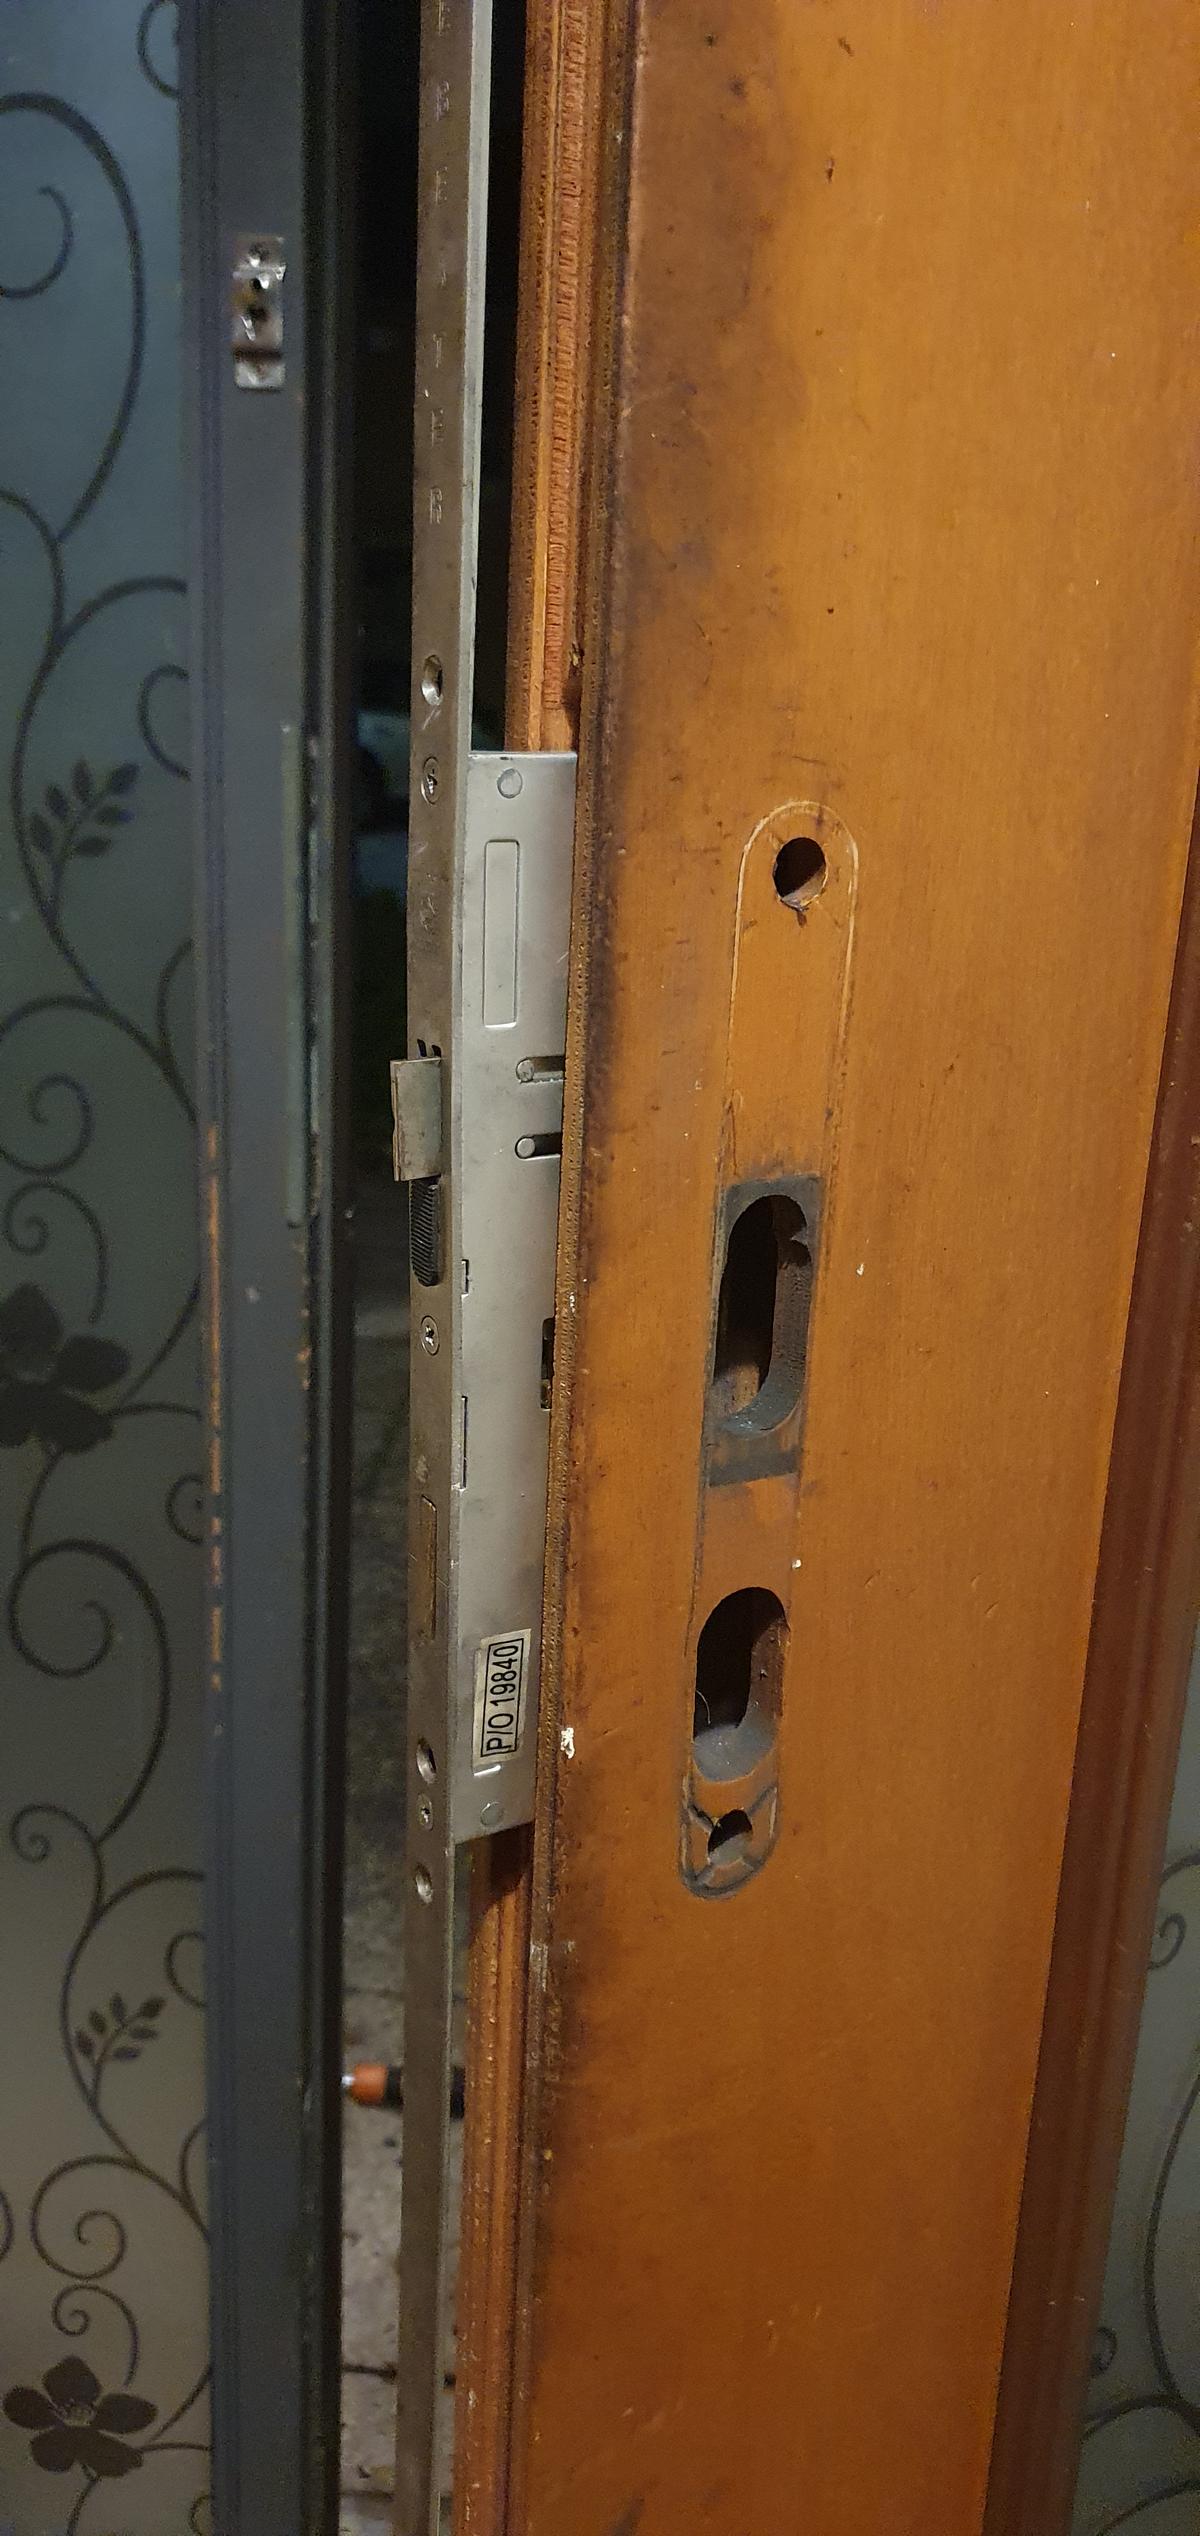 A broken door lock that will be fixed by AD Locksmithing